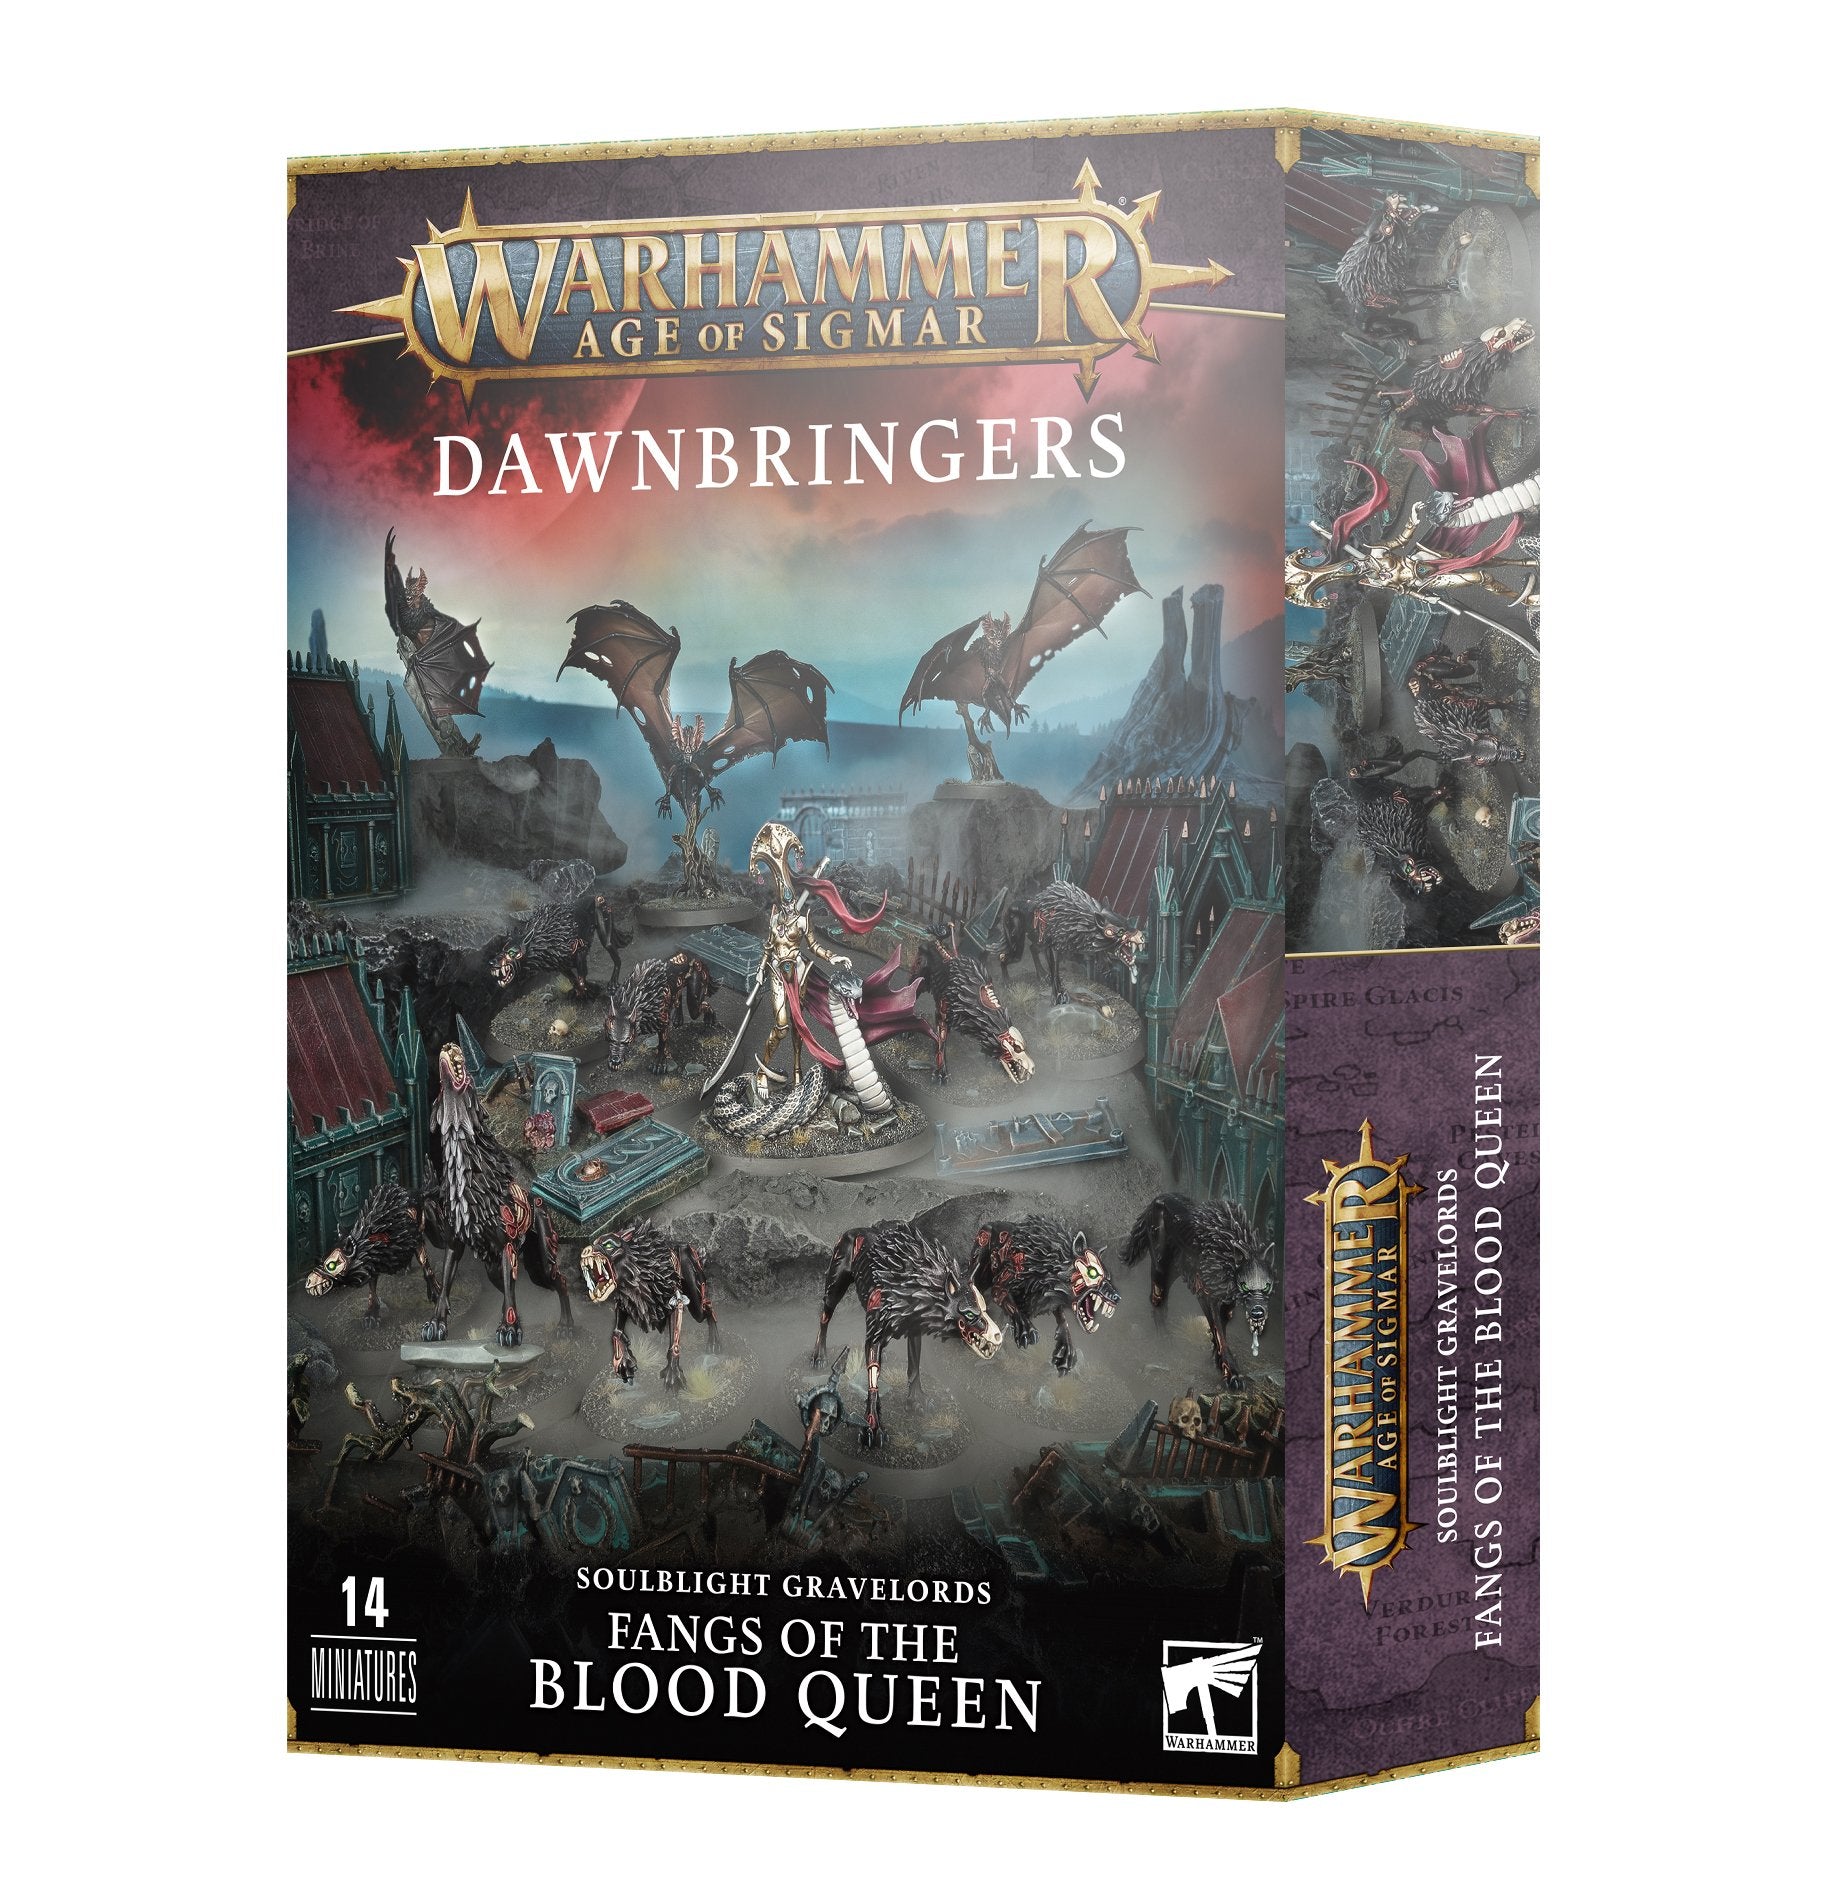 Soulblight Gravelords: Fangs of the Blood Queen - Release Date 17/2/24 - Loaded Dice